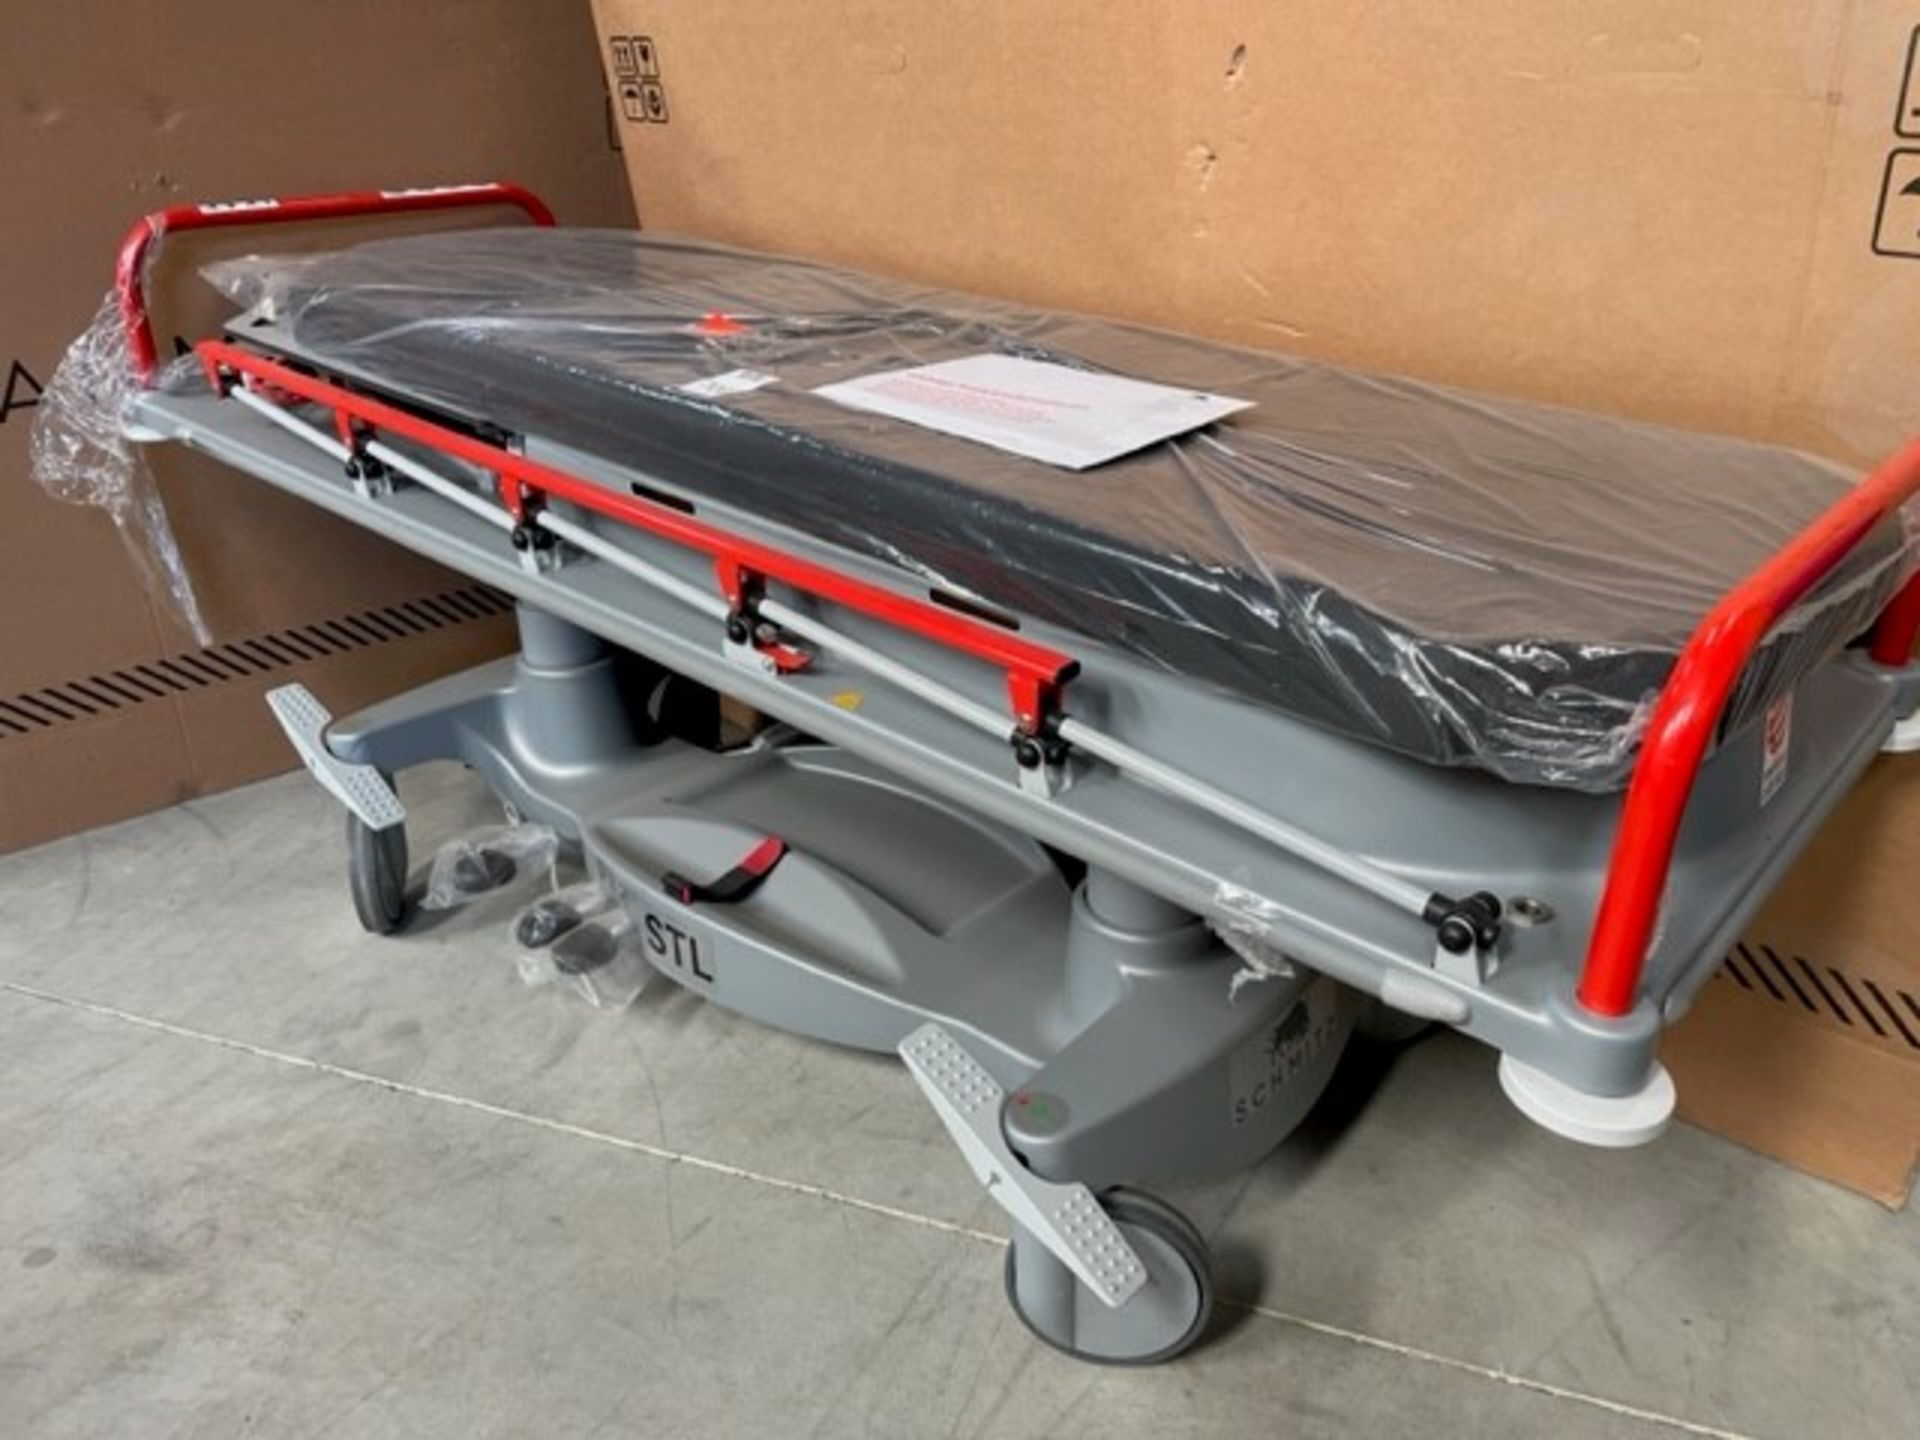 STL Red Dot Surgical Trolley (Location: Brentwood. Please Refer to General Notes)